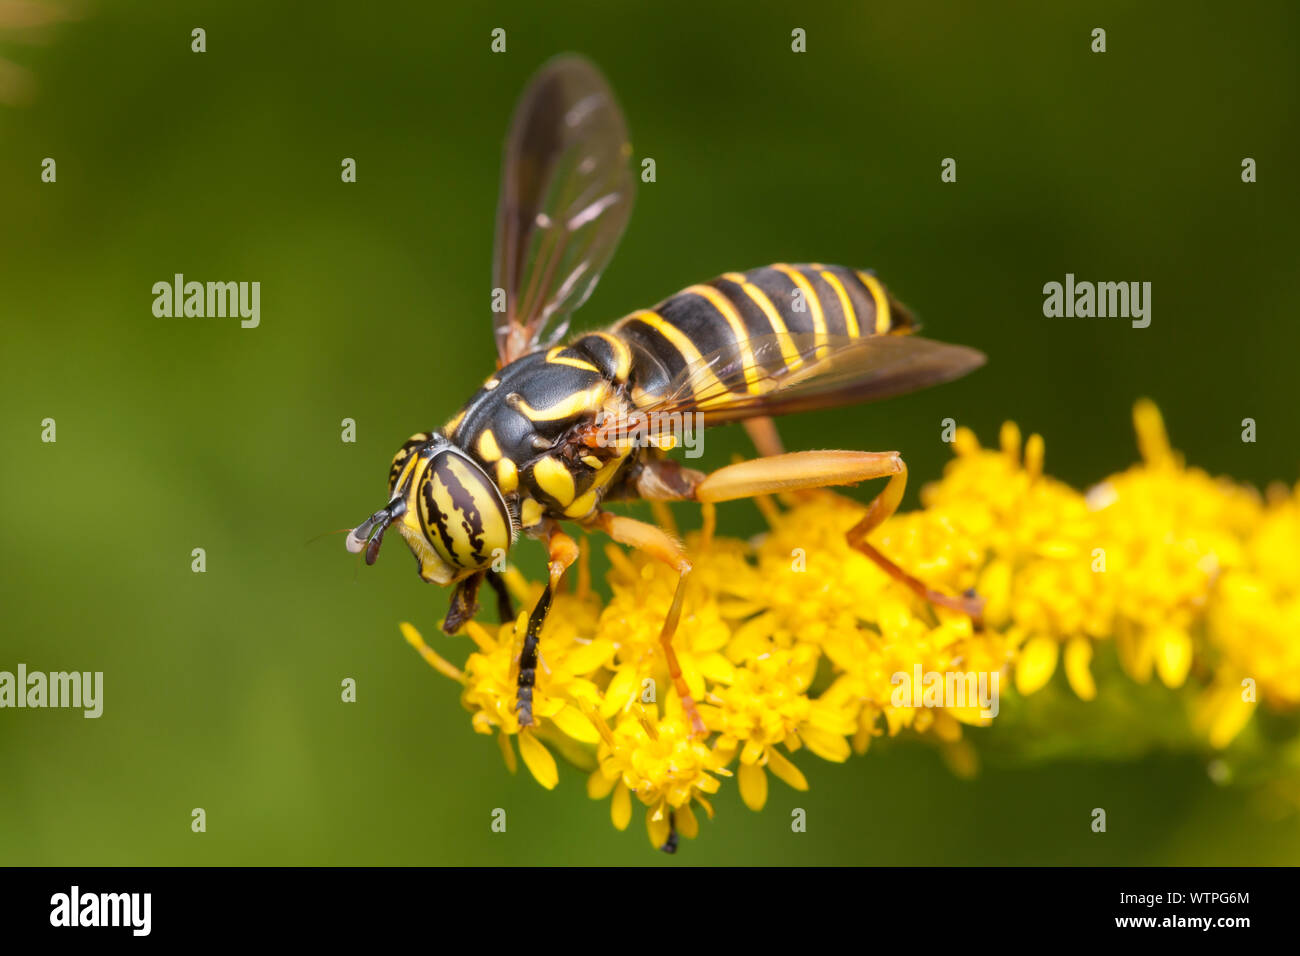 A Syrphid Fly (Spilomyia longicornis) foraging on a Goldenrod flower.   This fly mimics a wasp or yellowjacket. Stock Photo